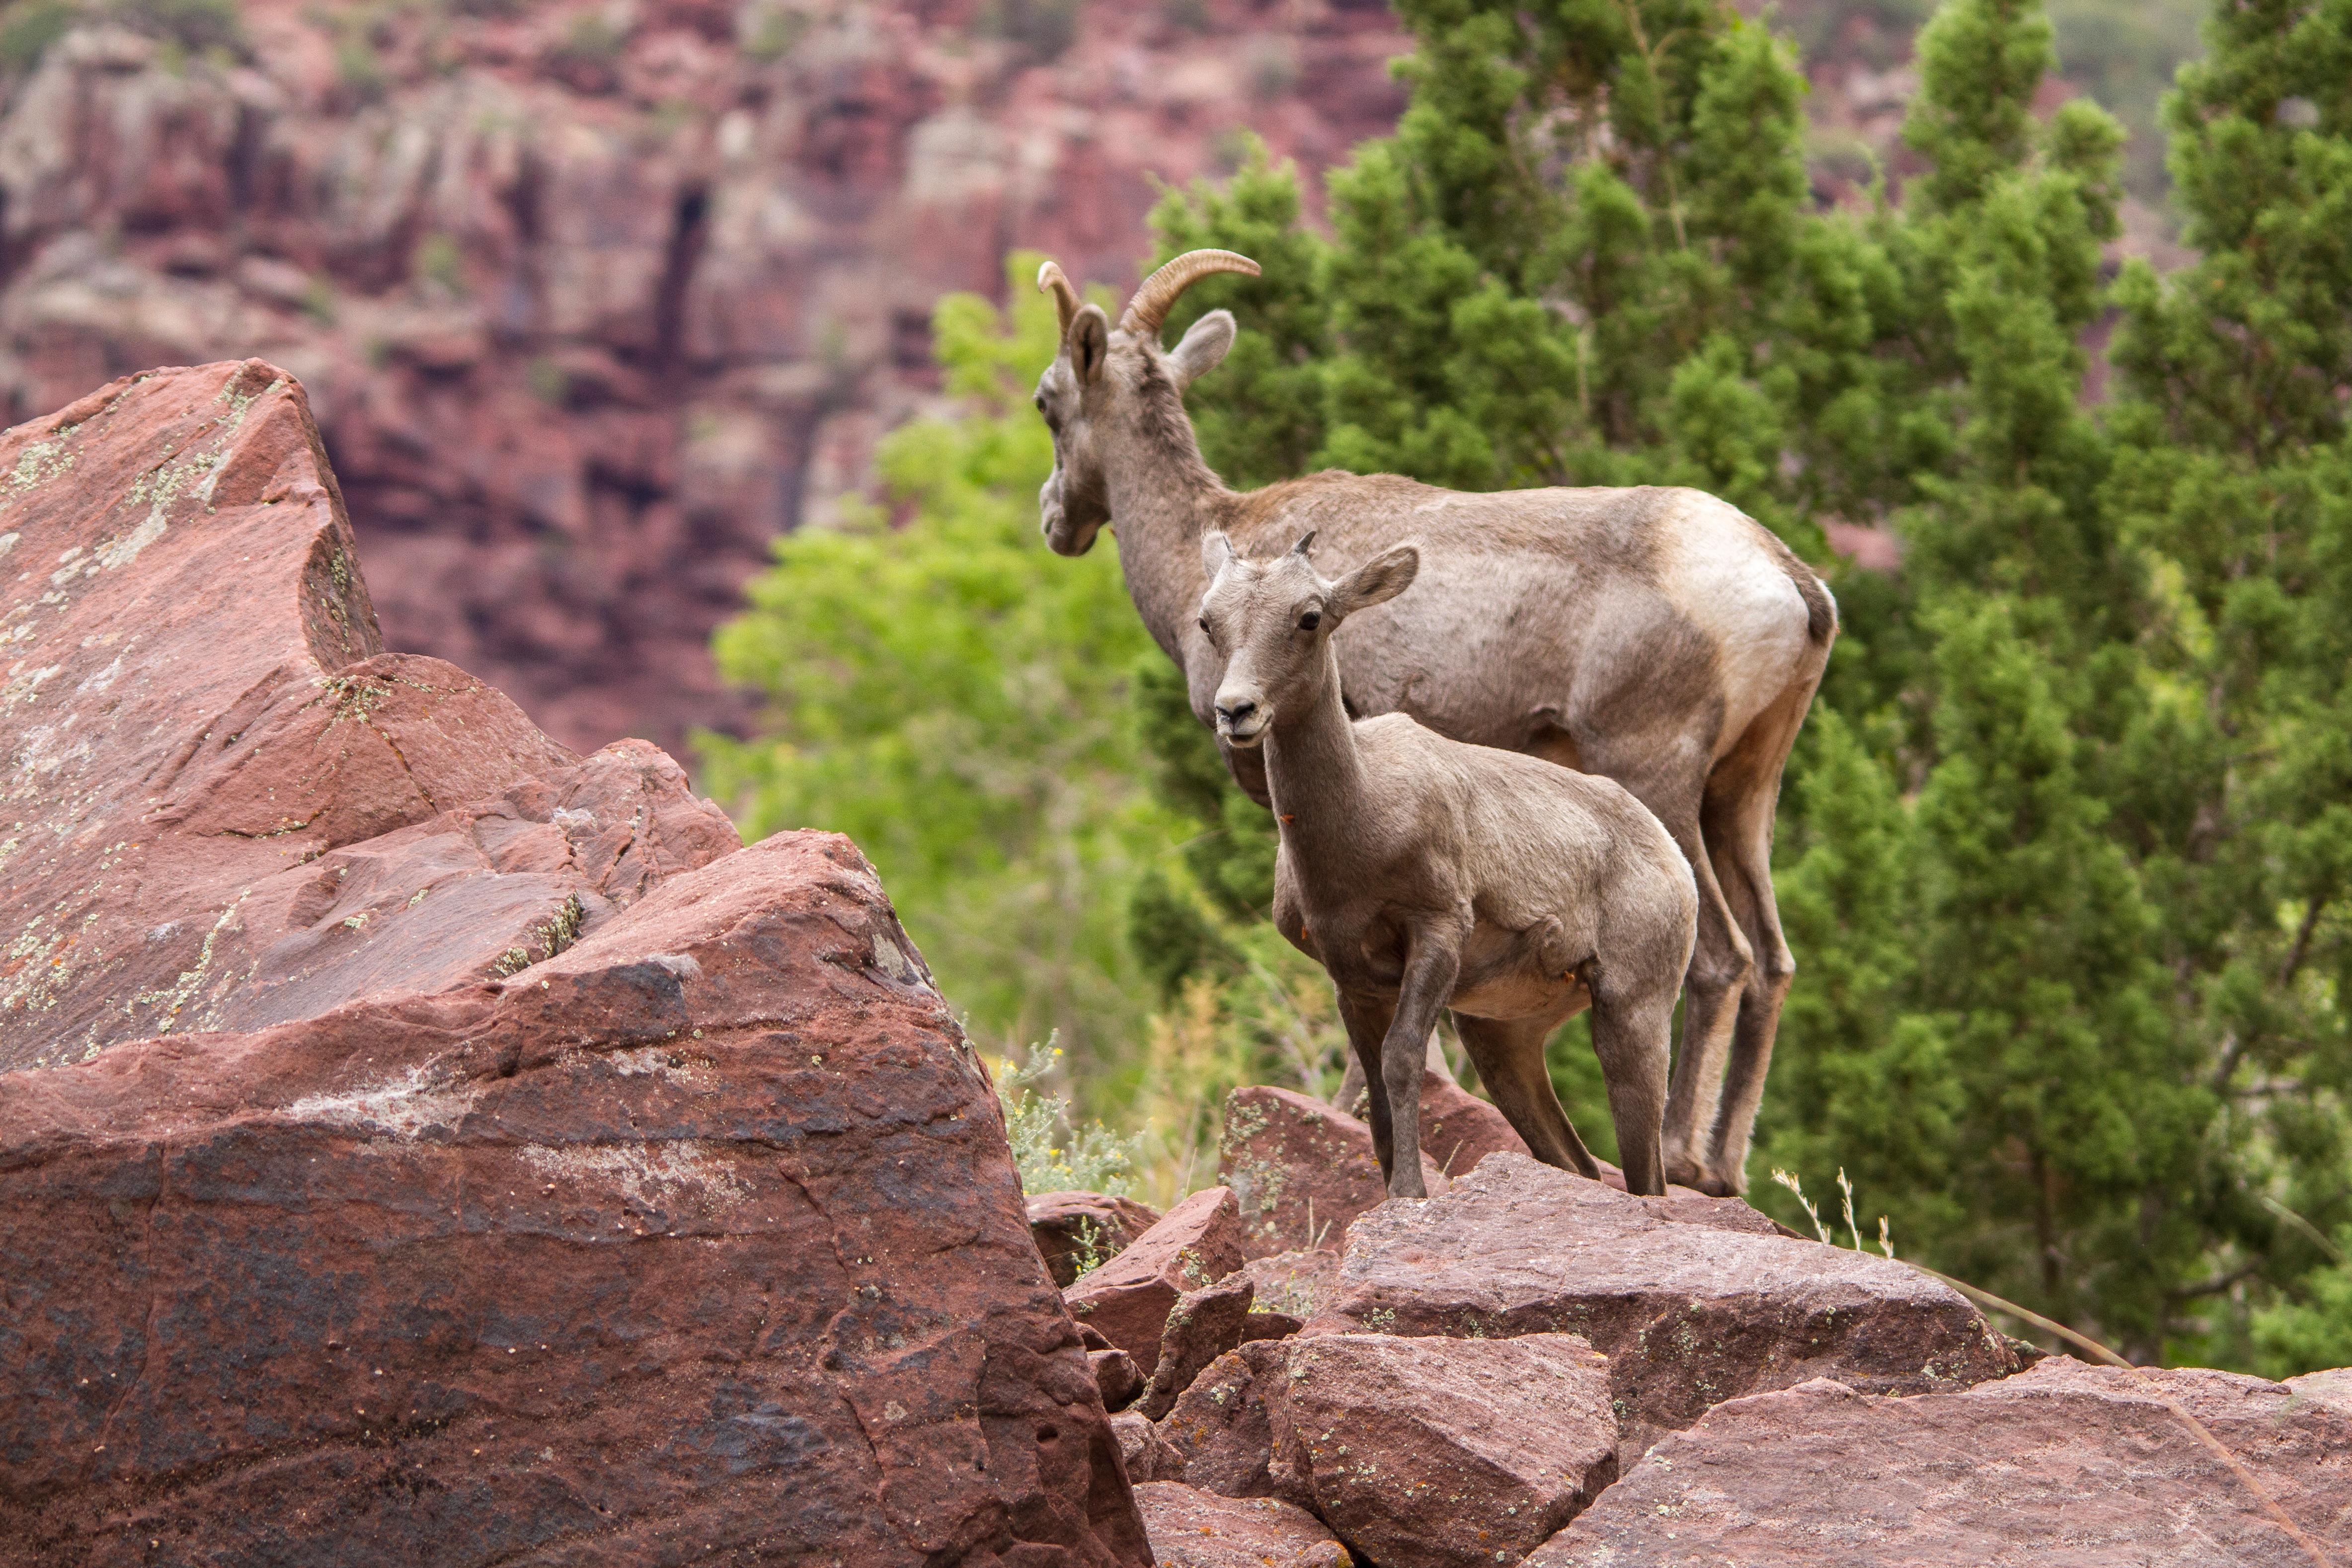 A bighorn sheep lamb stands in front of a bighorn ewe.